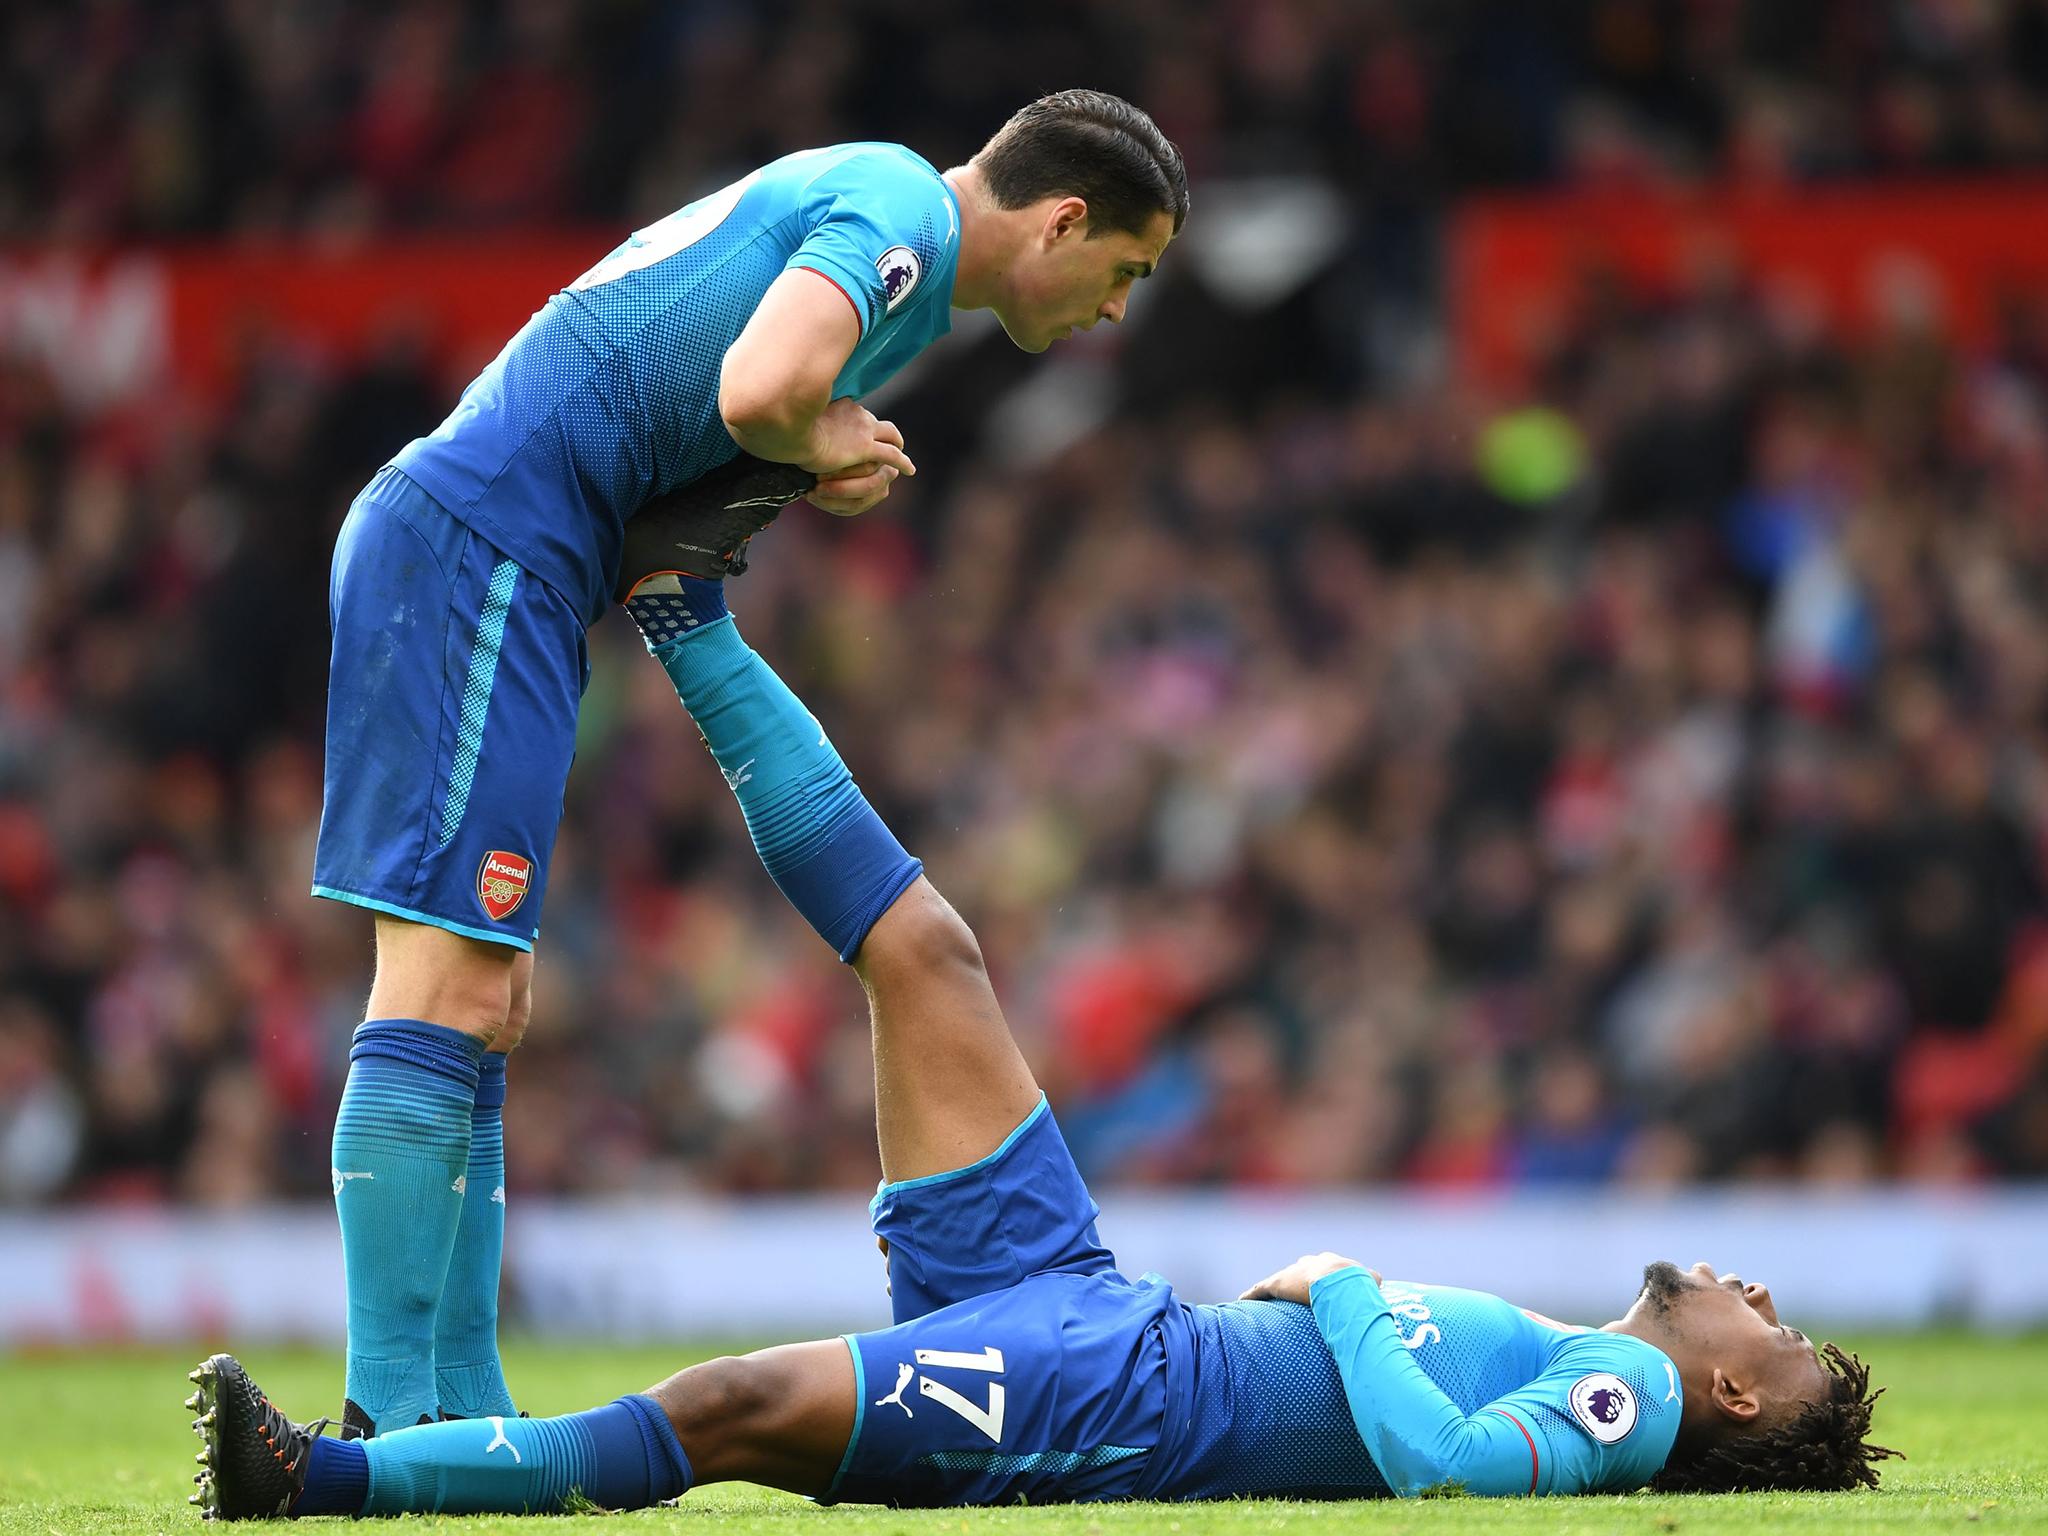 Alex iwobi is recovering from a knock picked up in Arsenal's 2-1 defeat by Manchester United